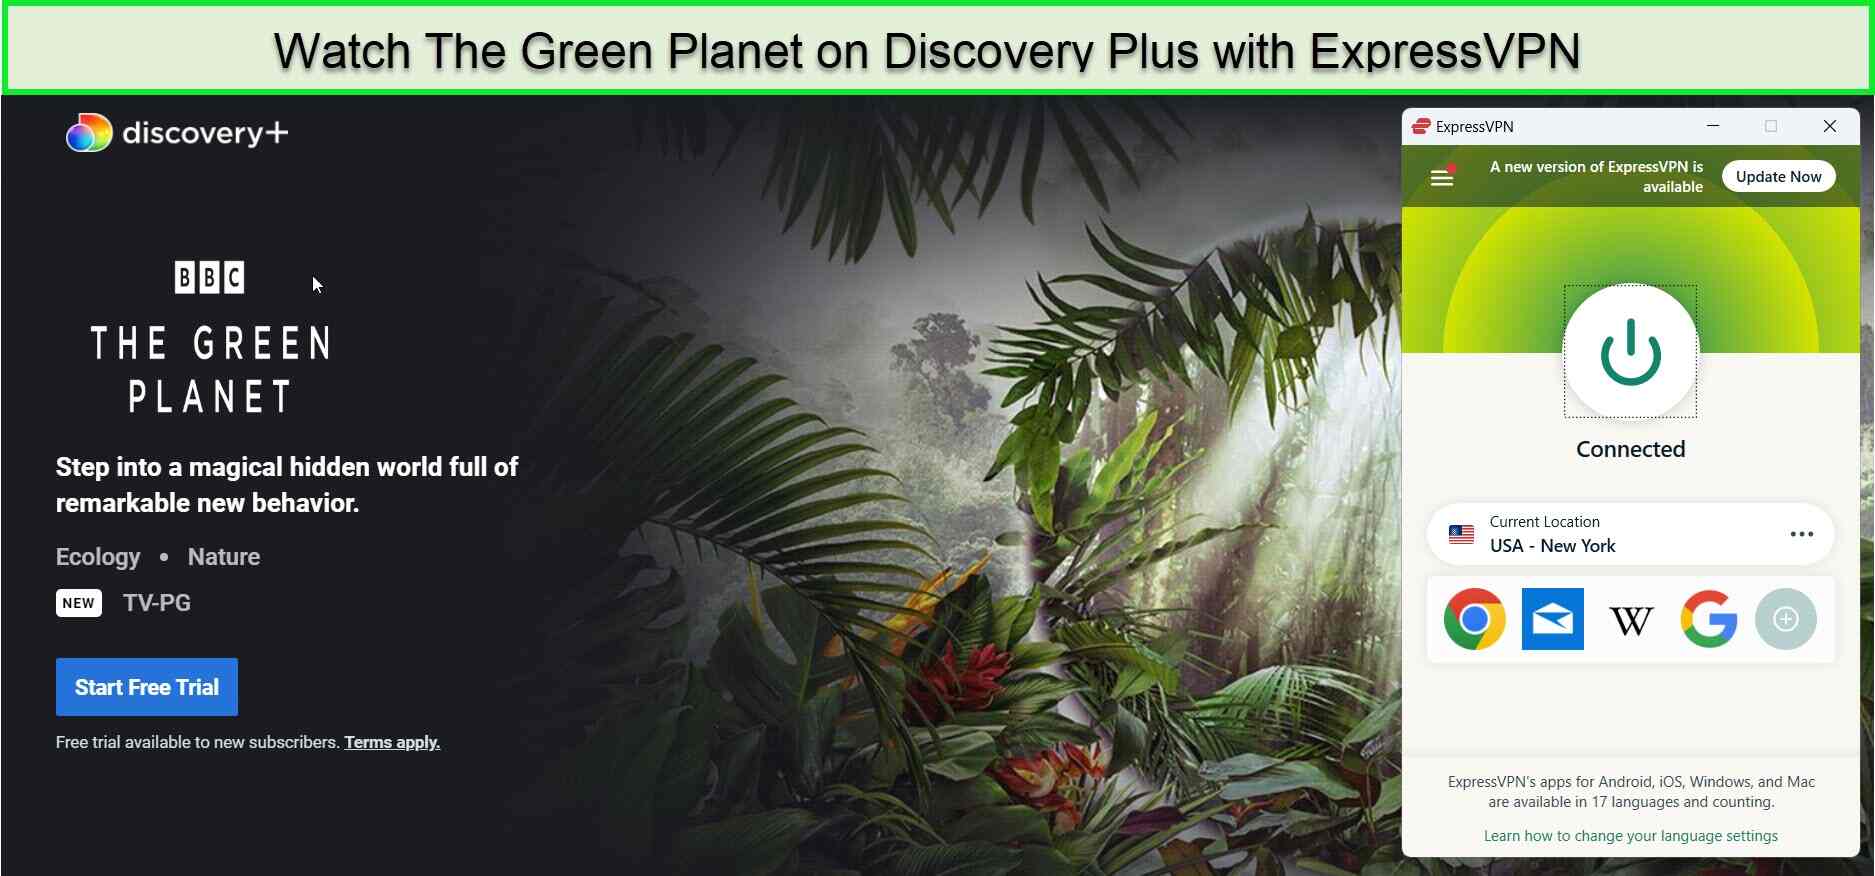 Watch-The-Green-Planet-outside-USA-on-Discovery-Plus-with-ExpressVPN